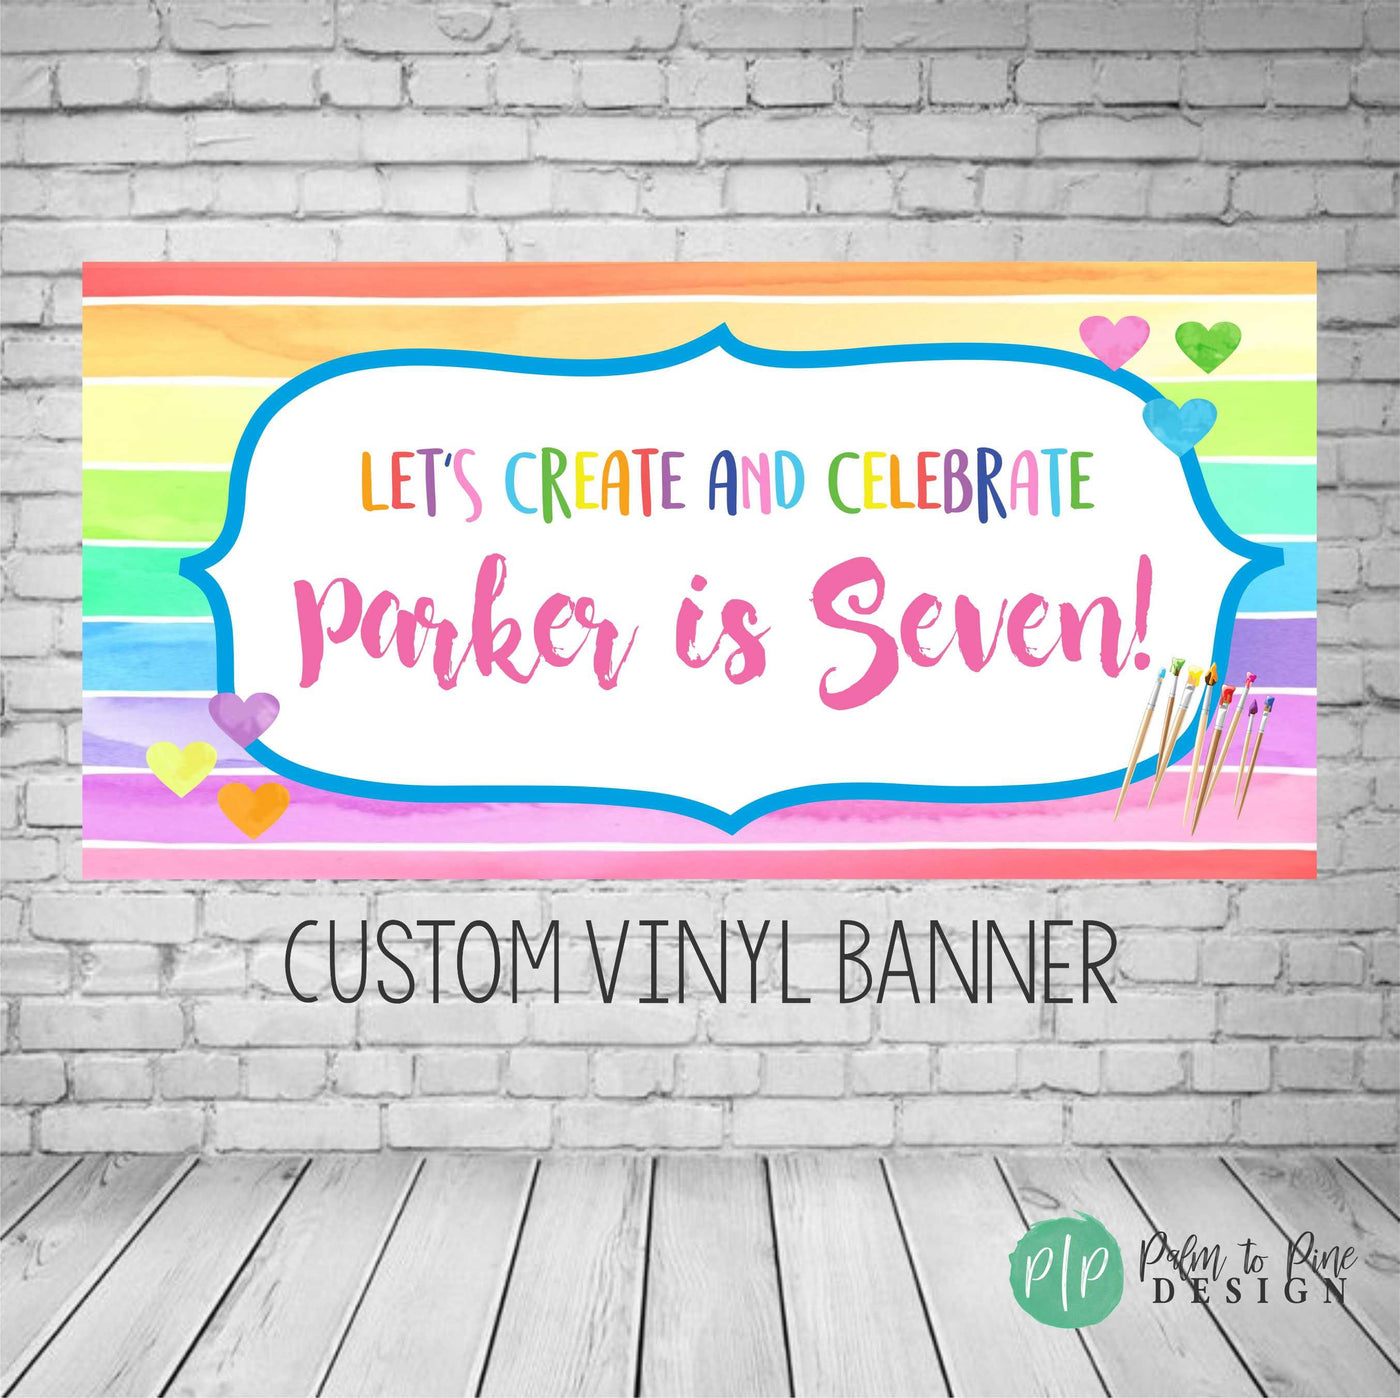 Art Party Birthday Banner, Paint Party Decor, Art Birthday Party, Painting Party Decorations, Painting Party Banner, Vinyl Banner, Birthday